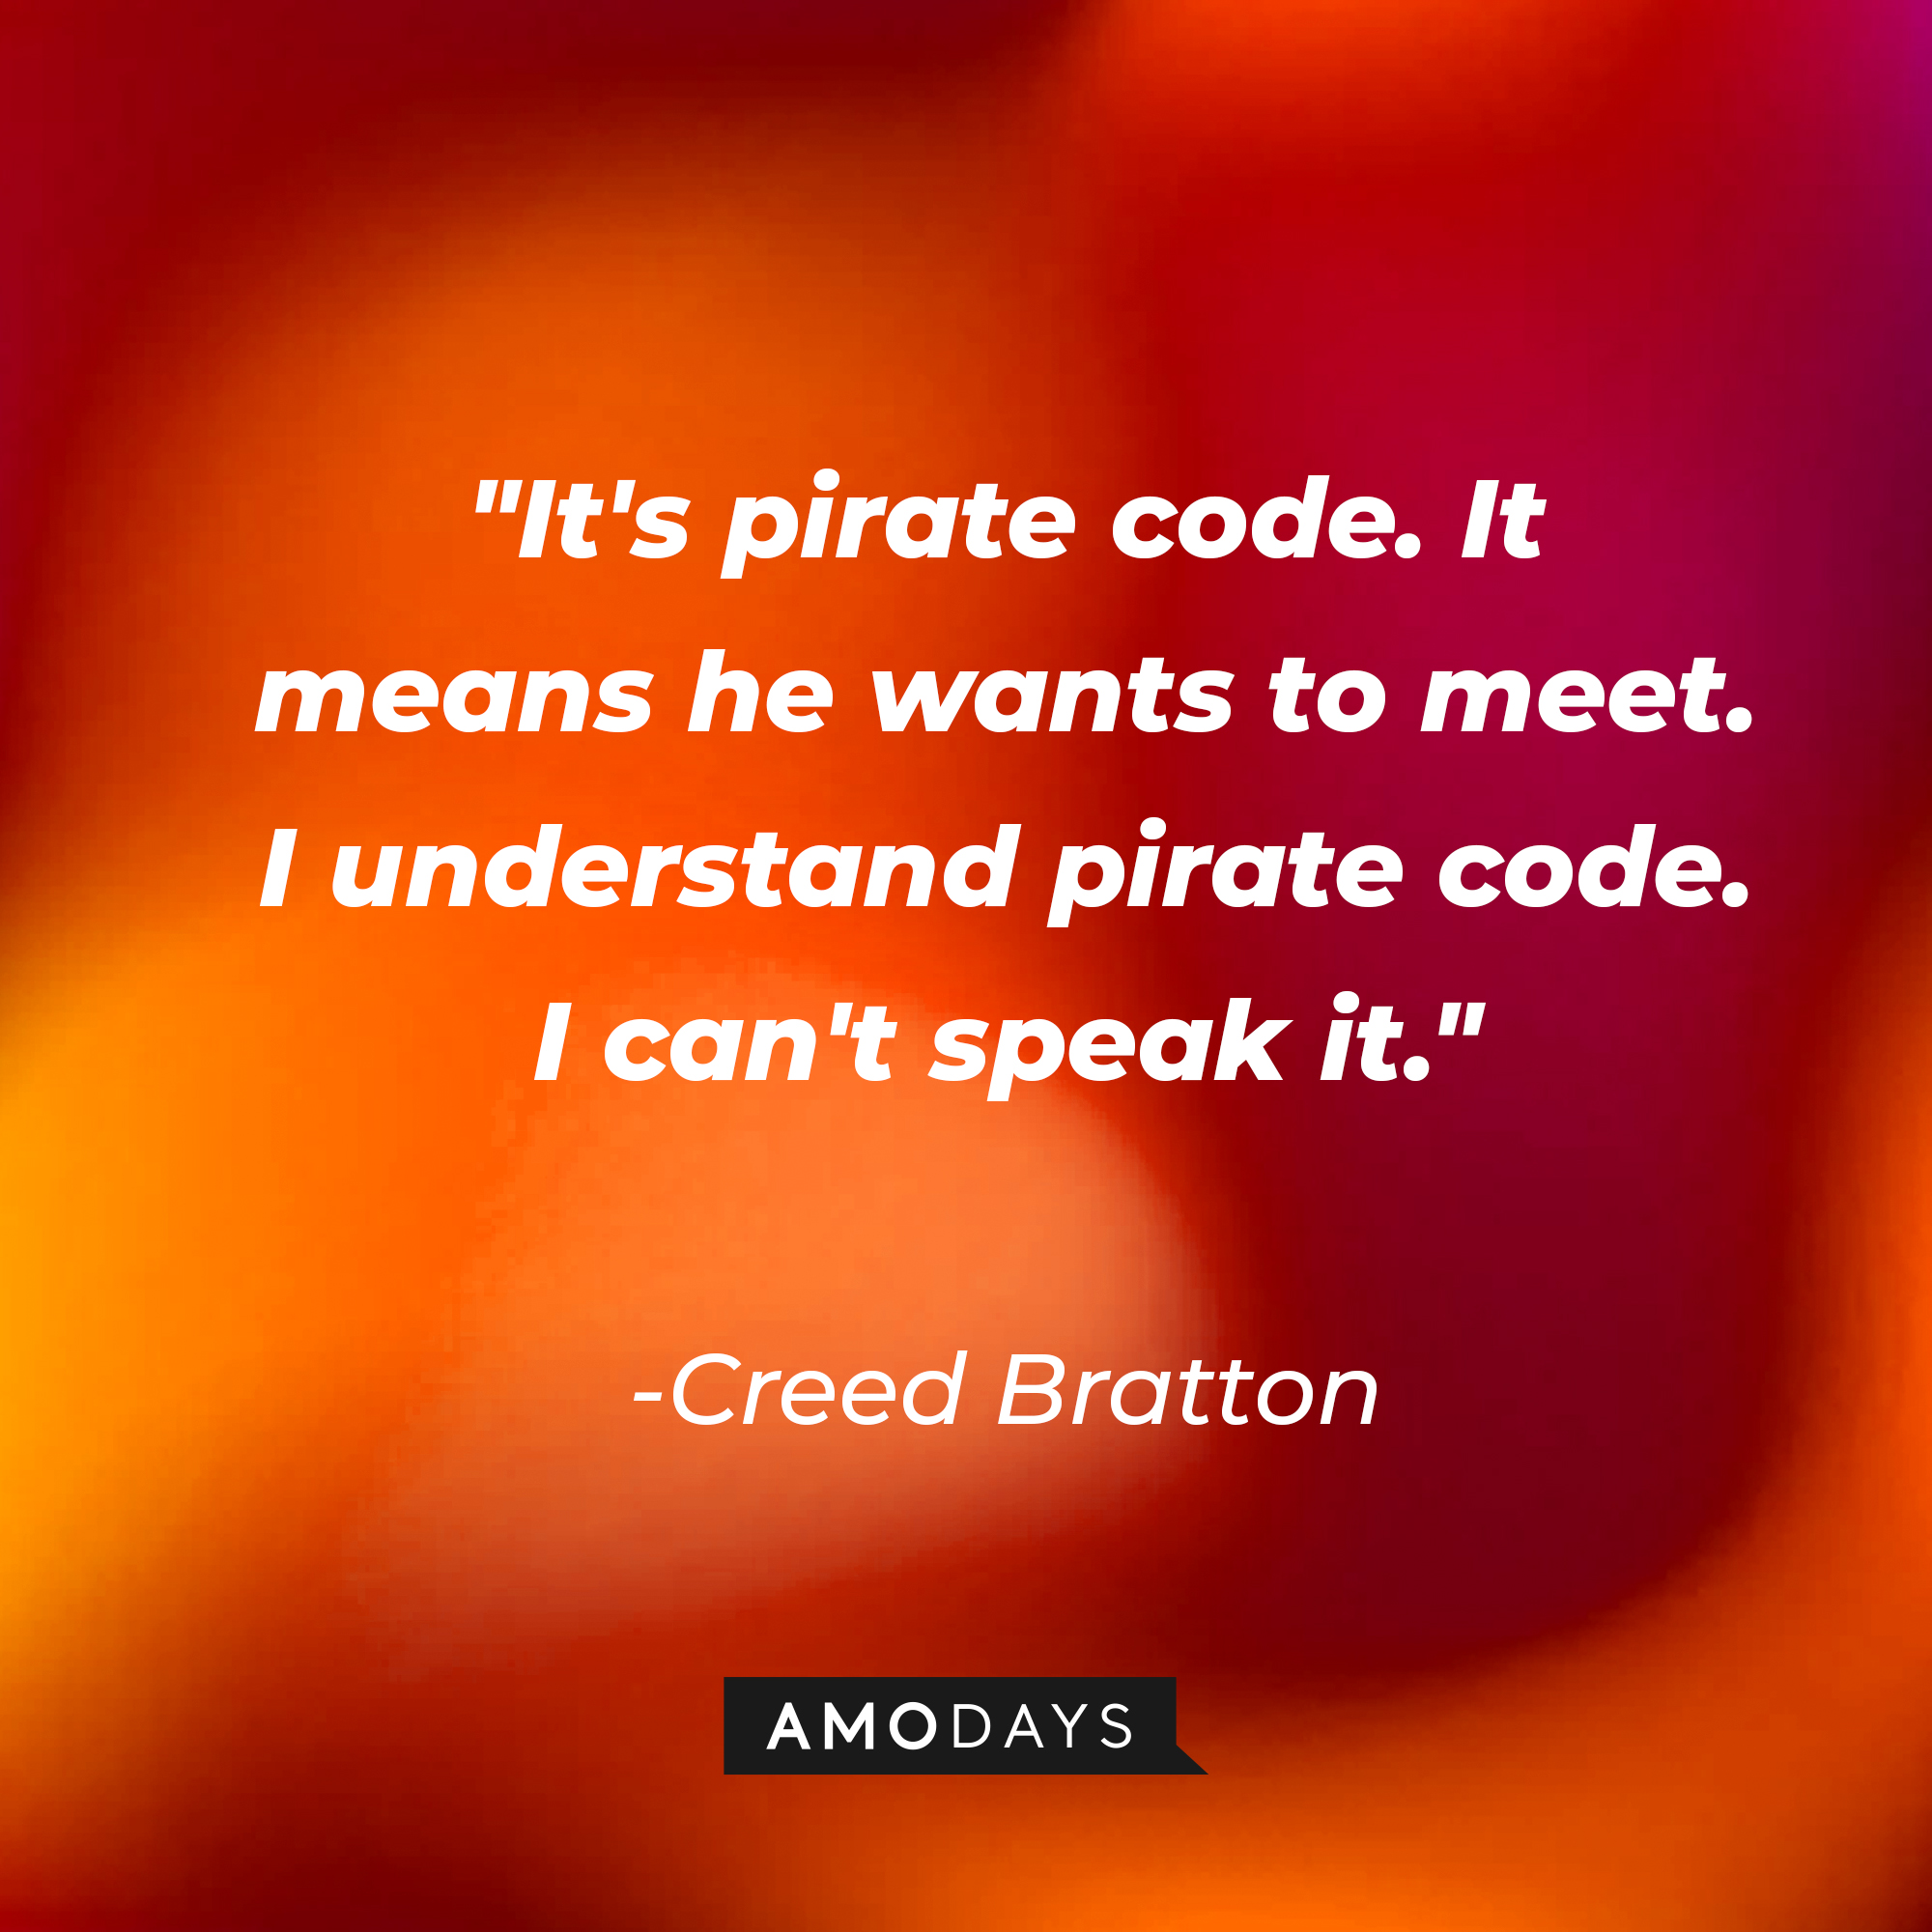 Creed Bratton's quote: "It's pirate code. It means he wants to meet. I understand pirate code. I can't speak it." | Source: AmoDays